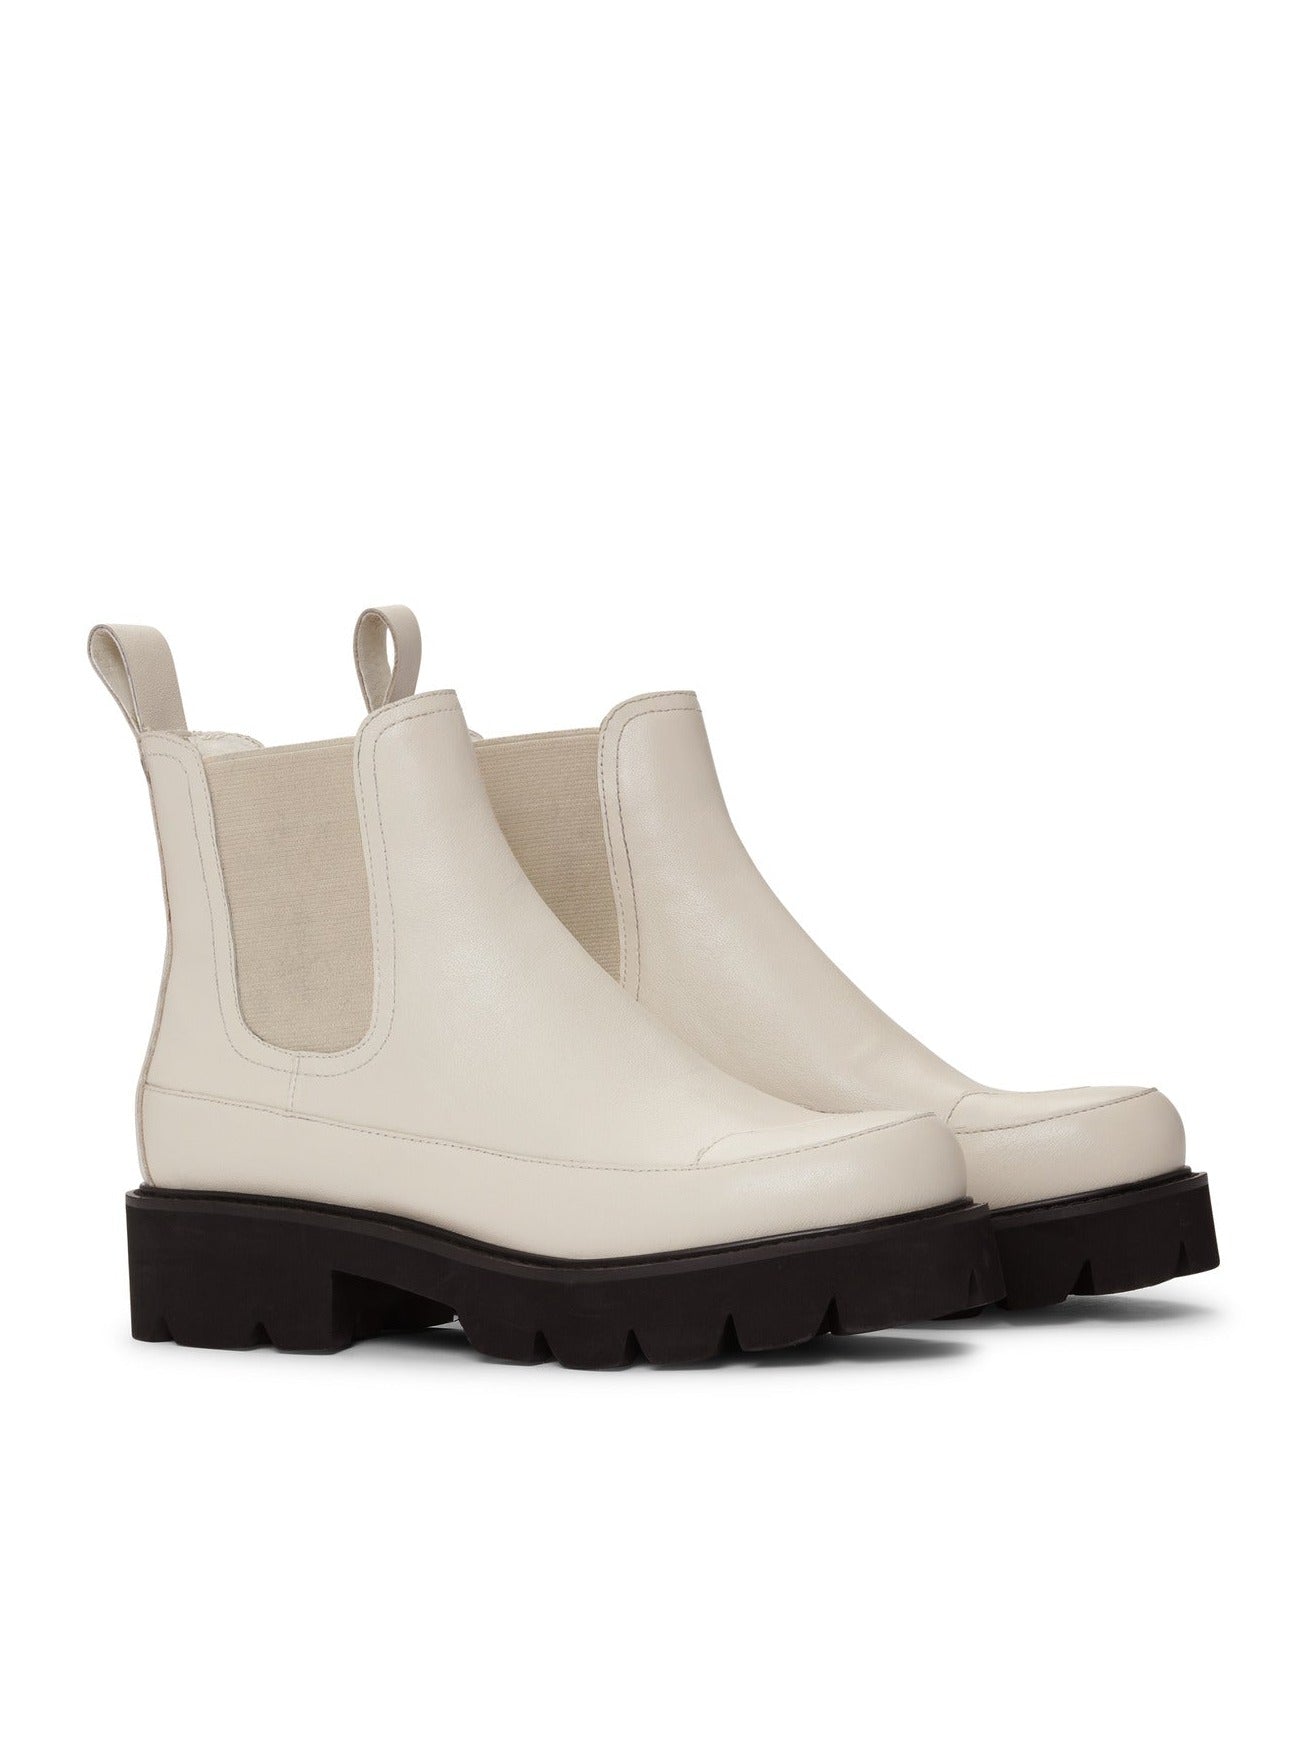 ILSE JACOBSEN MILEY SHORT LEATHER ANKLE BOOT | SAND